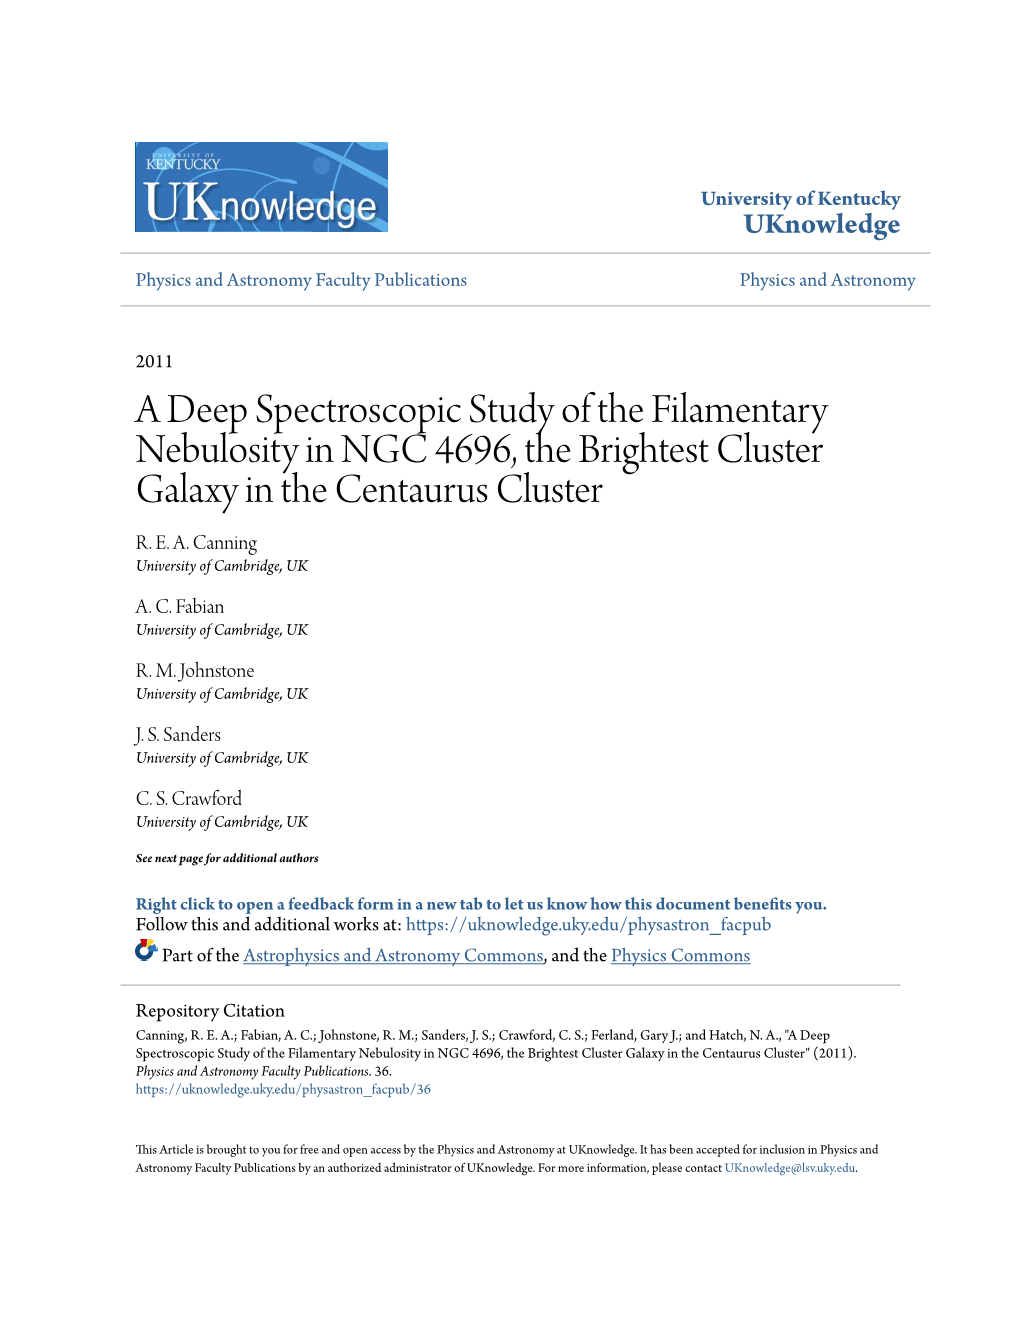 A Deep Spectroscopic Study of the Filamentary Nebulosity in NGC 4696, the Brightest Cluster Galaxy in the Centaurus Cluster R